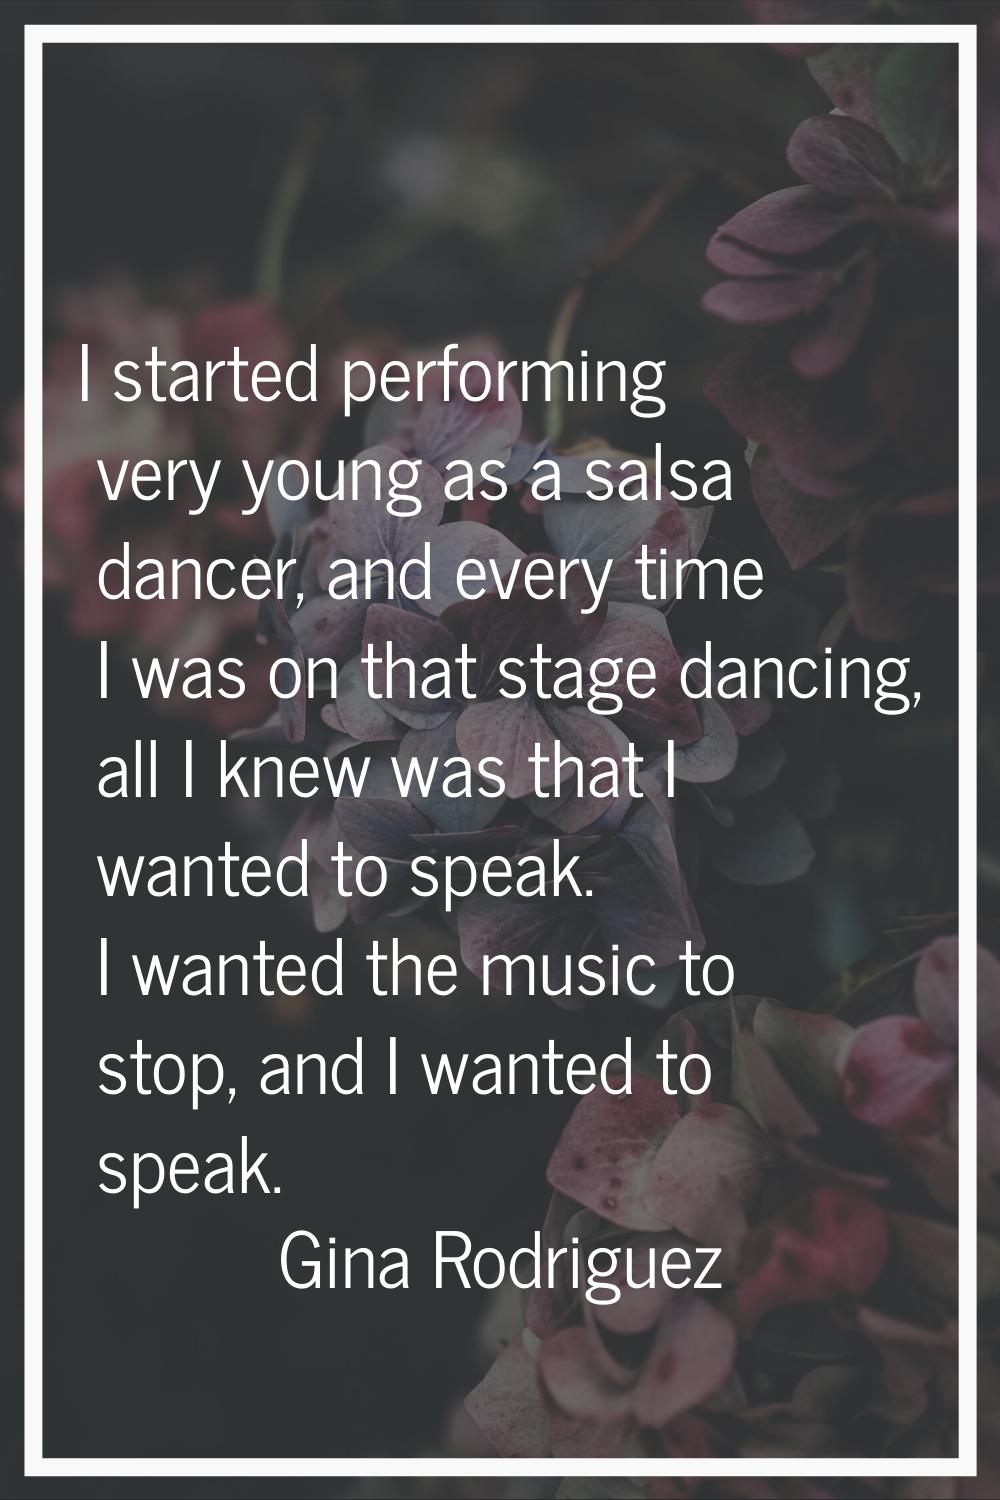 I started performing very young as a salsa dancer, and every time I was on that stage dancing, all 